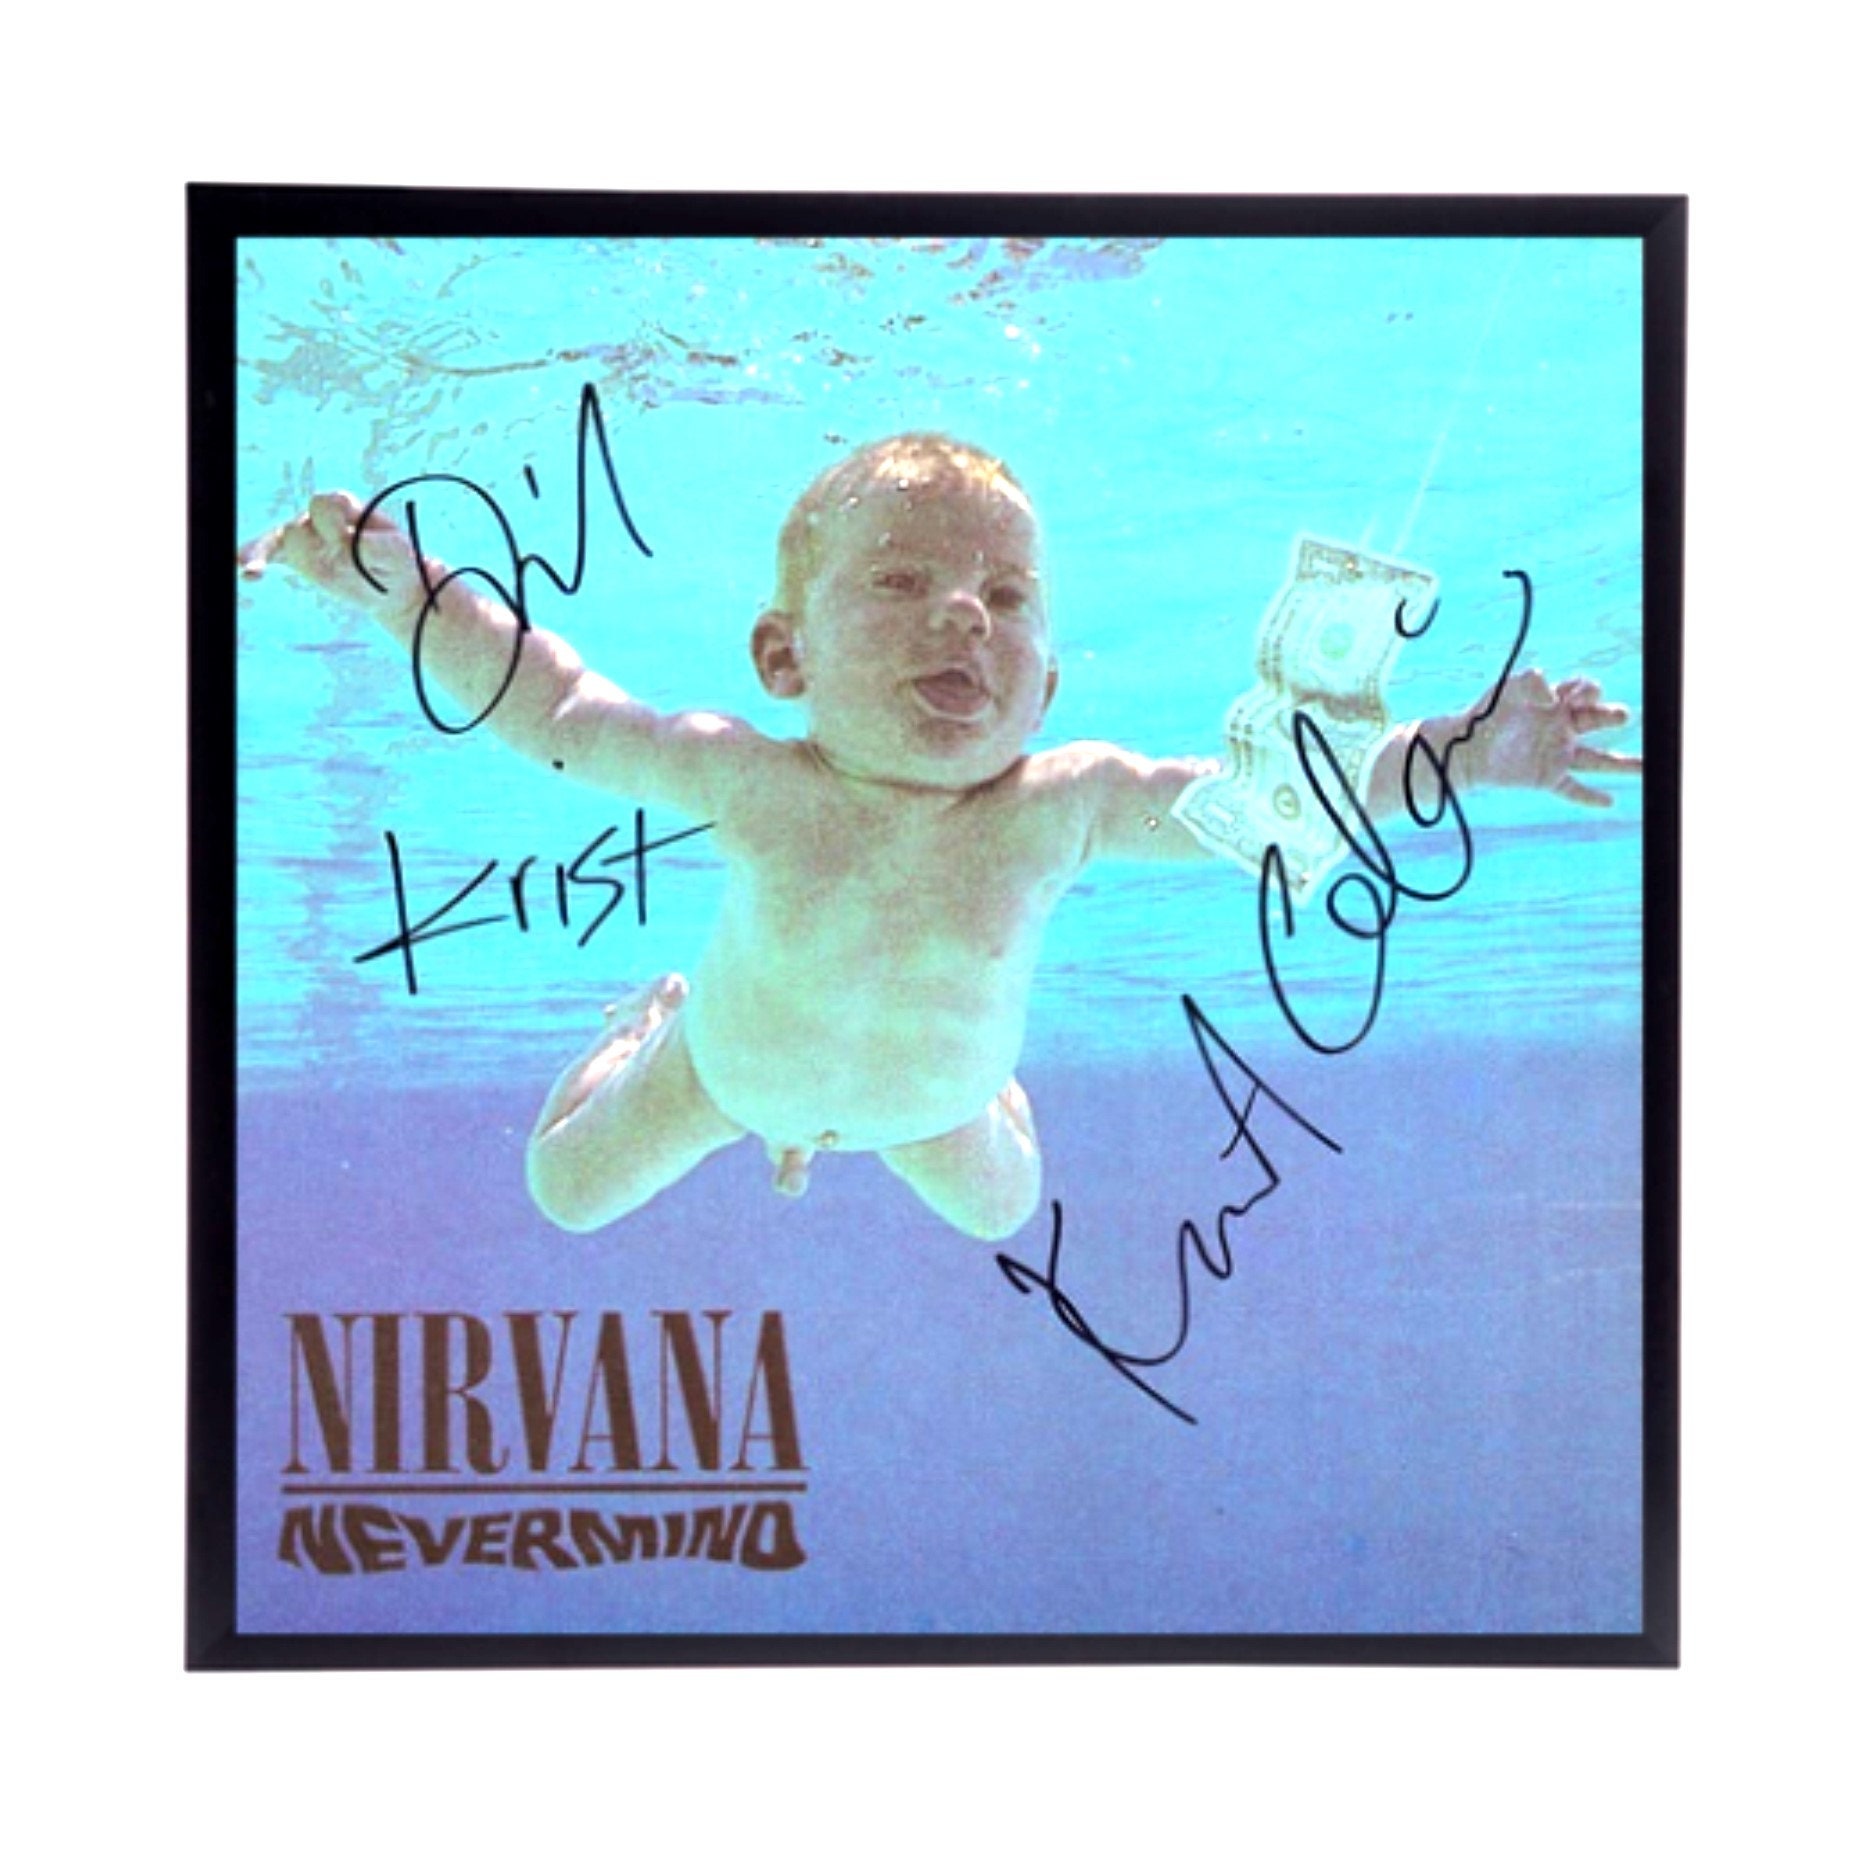 Sold at Auction: Dave Grohl Signed Nirvana Nevermind Vinyl LP Certified